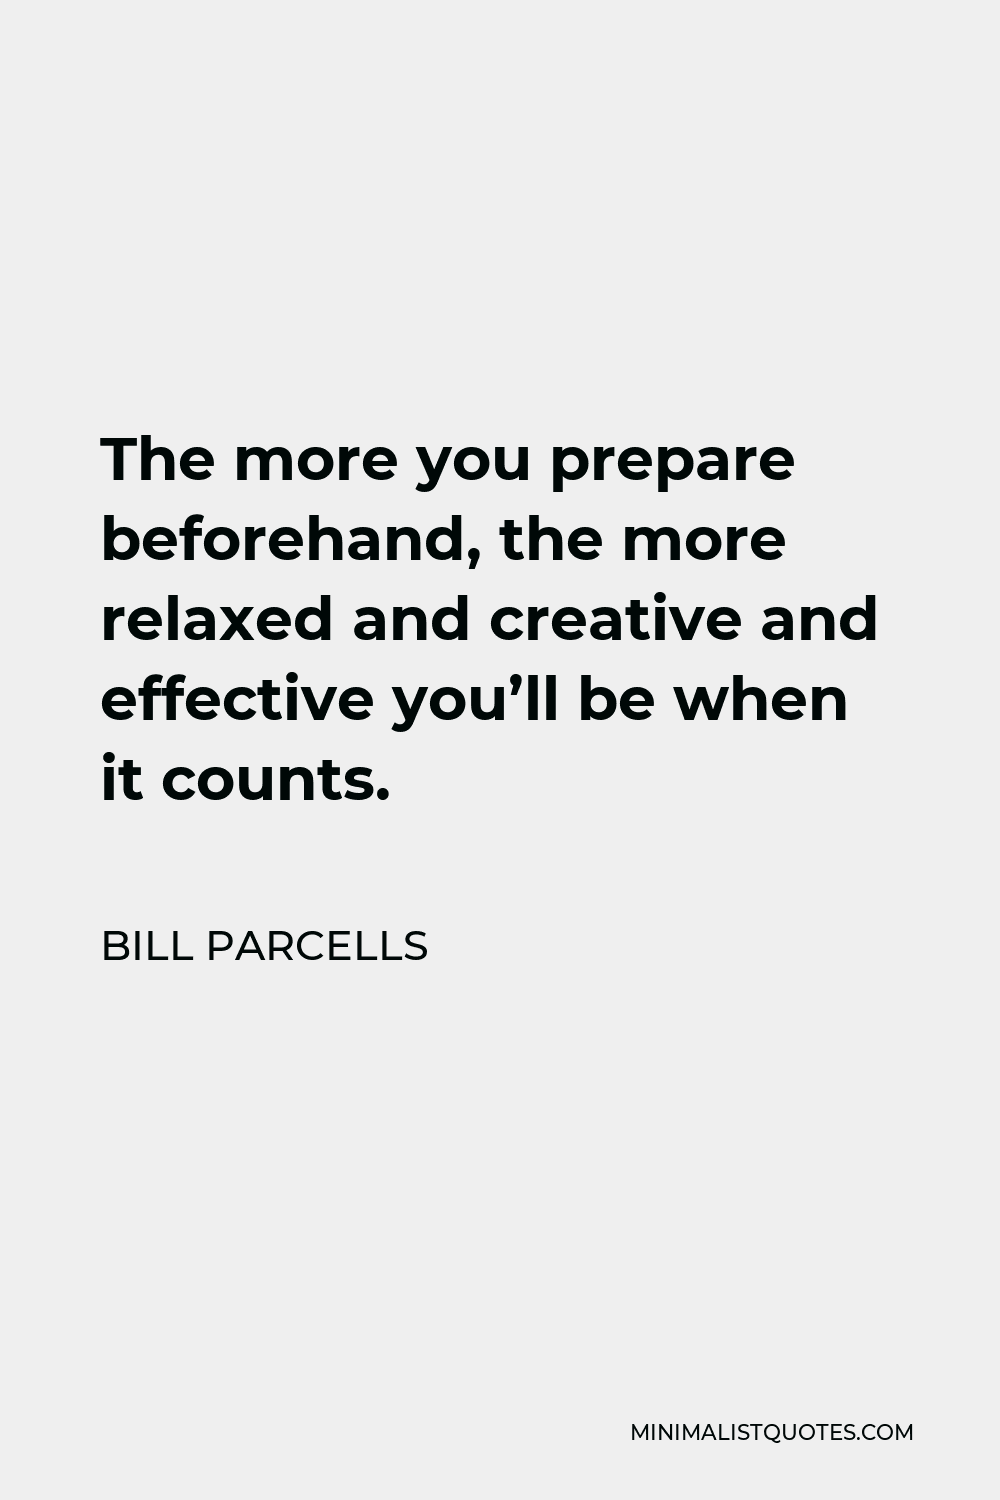 Bill Parcells Quote - The more you prepare beforehand, the more relaxed and creative and effective you’ll be when it counts.